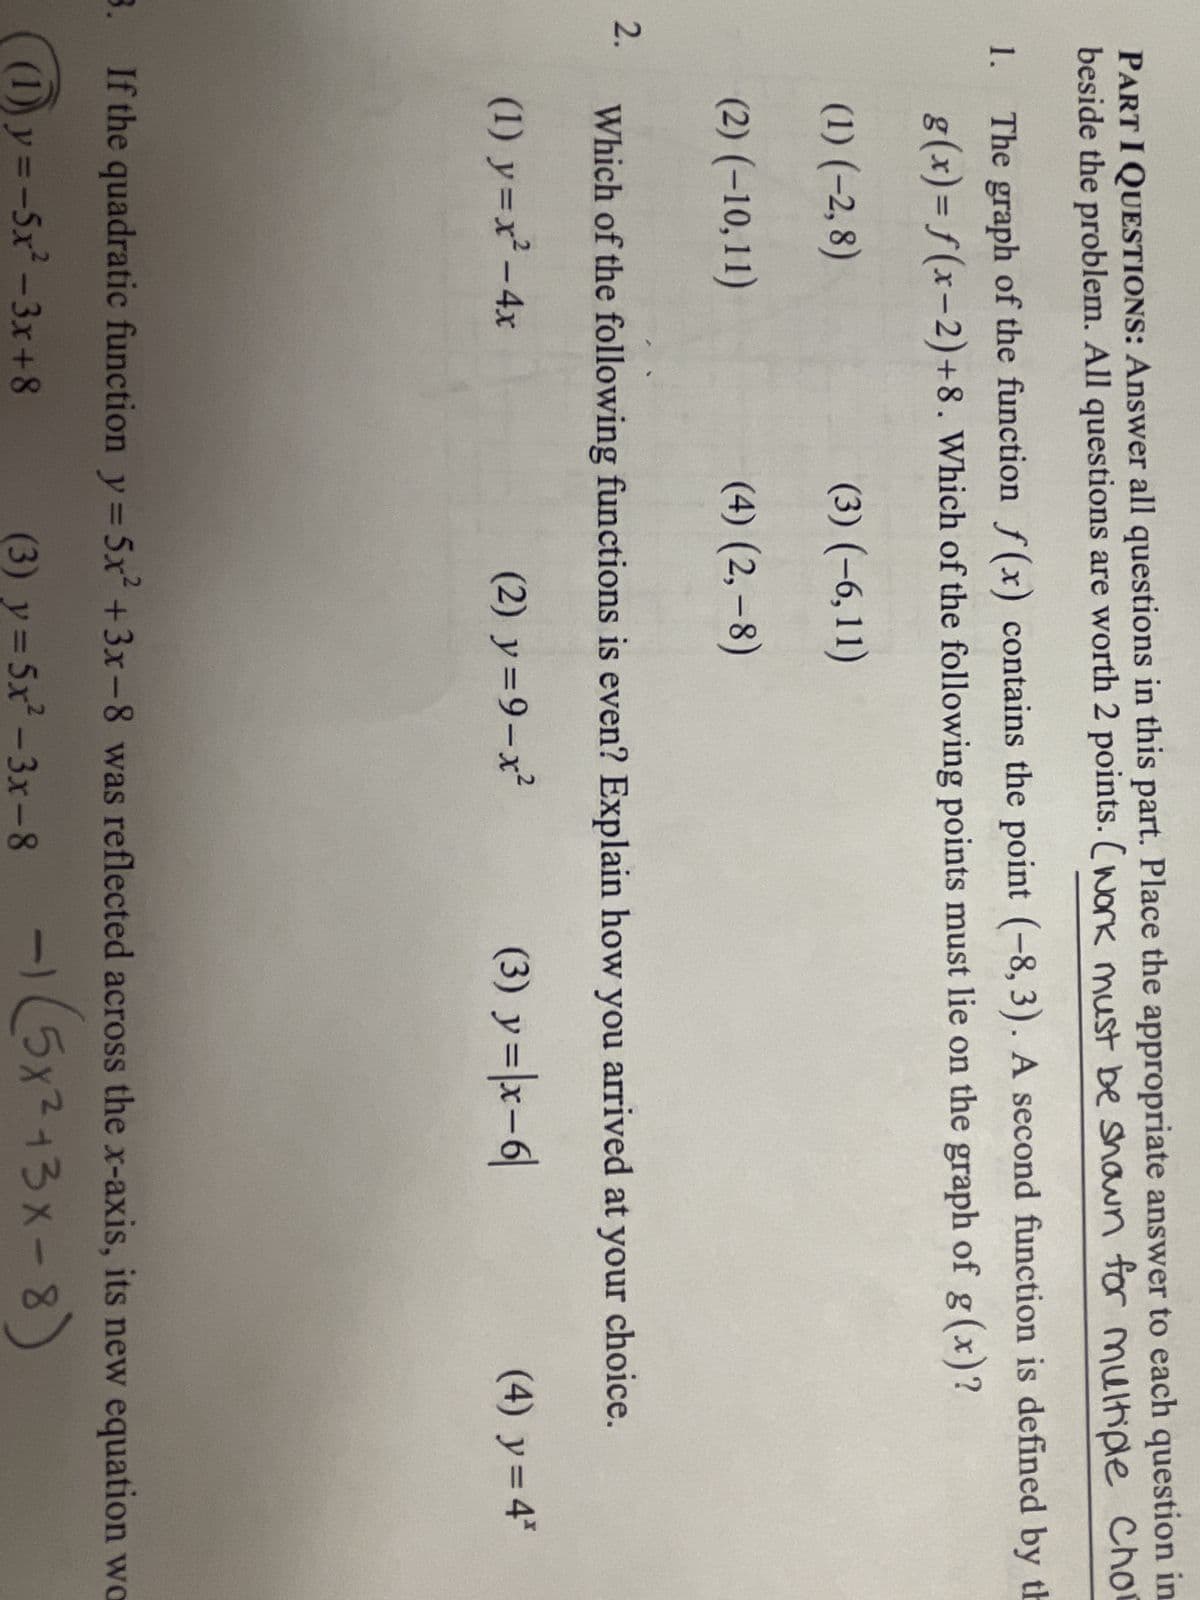 PART I QUESTIONS: Answer all questions in this part. Place the appropriate answer to each question in
beside the problem. All questions are worth 2 points. (work must be showwn for multiple Cho
1. The graph of the function f(x) contains the point (-8, 3). A second function is defined by th
g(x)=f(x-2)+8. Which of the following points must lie on the graph of g (x)?
(3) (-6,11)
(4) (2,-8)
2.
(1) (-2,8)
(2) (-10,11)
Which of the following functions is even? Explain how you arrived at your choice.
(1) y=x² - 4x
(2) y=9-x² (3) y = |x-6|
(4) y = 4*
3. If the quadratic function y=5x² + 3x-8 was reflected across the x-axis, its new equation wo
(1)y=-5x²-3x+8
-1 (5x²+3x-8)
(3) y = 5x²-3x-8